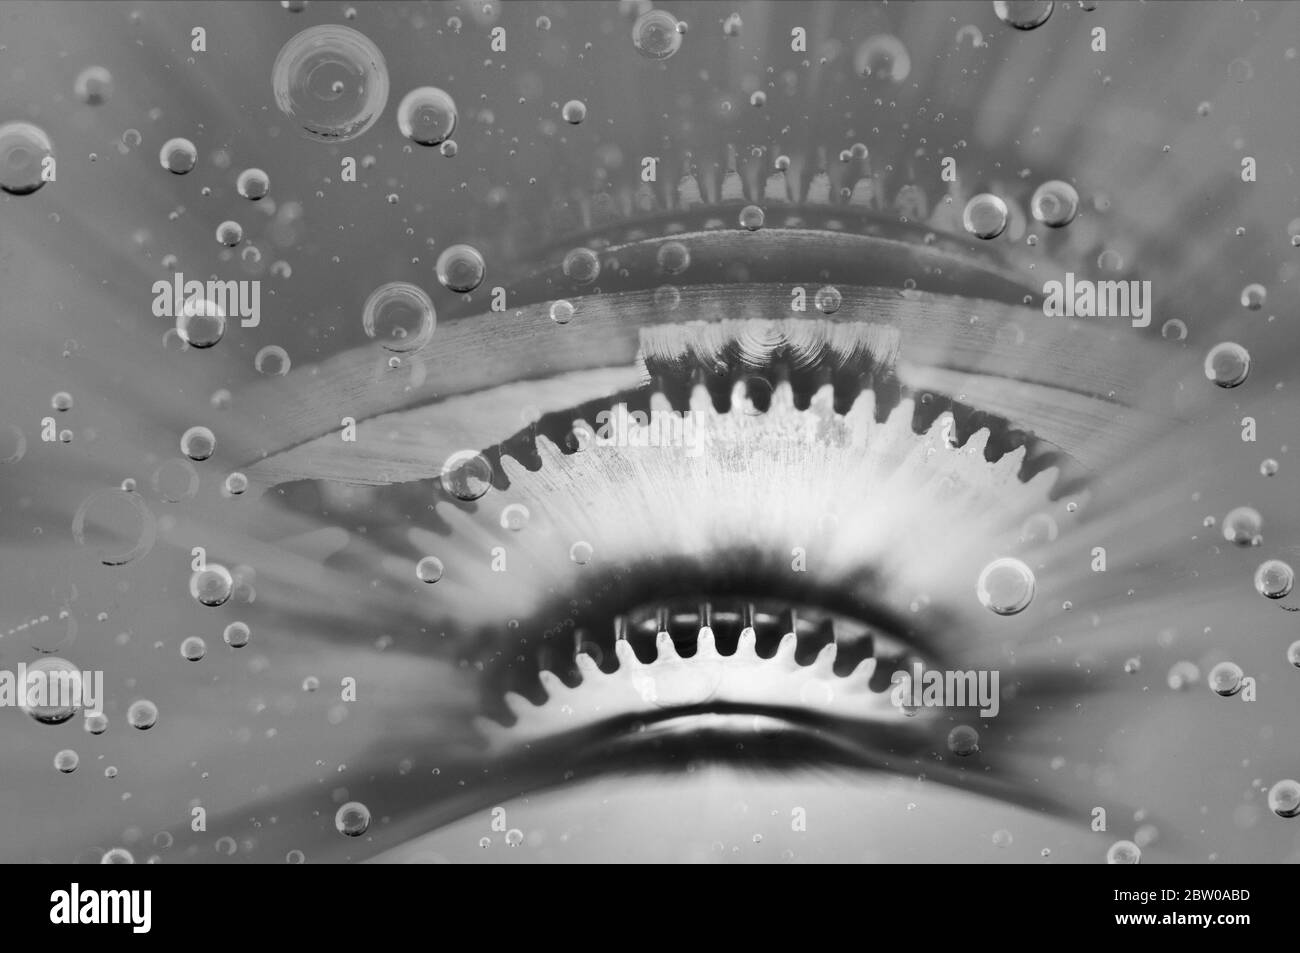 Metal gears in liquid or oil with bubbles. Black and white Stock Photo